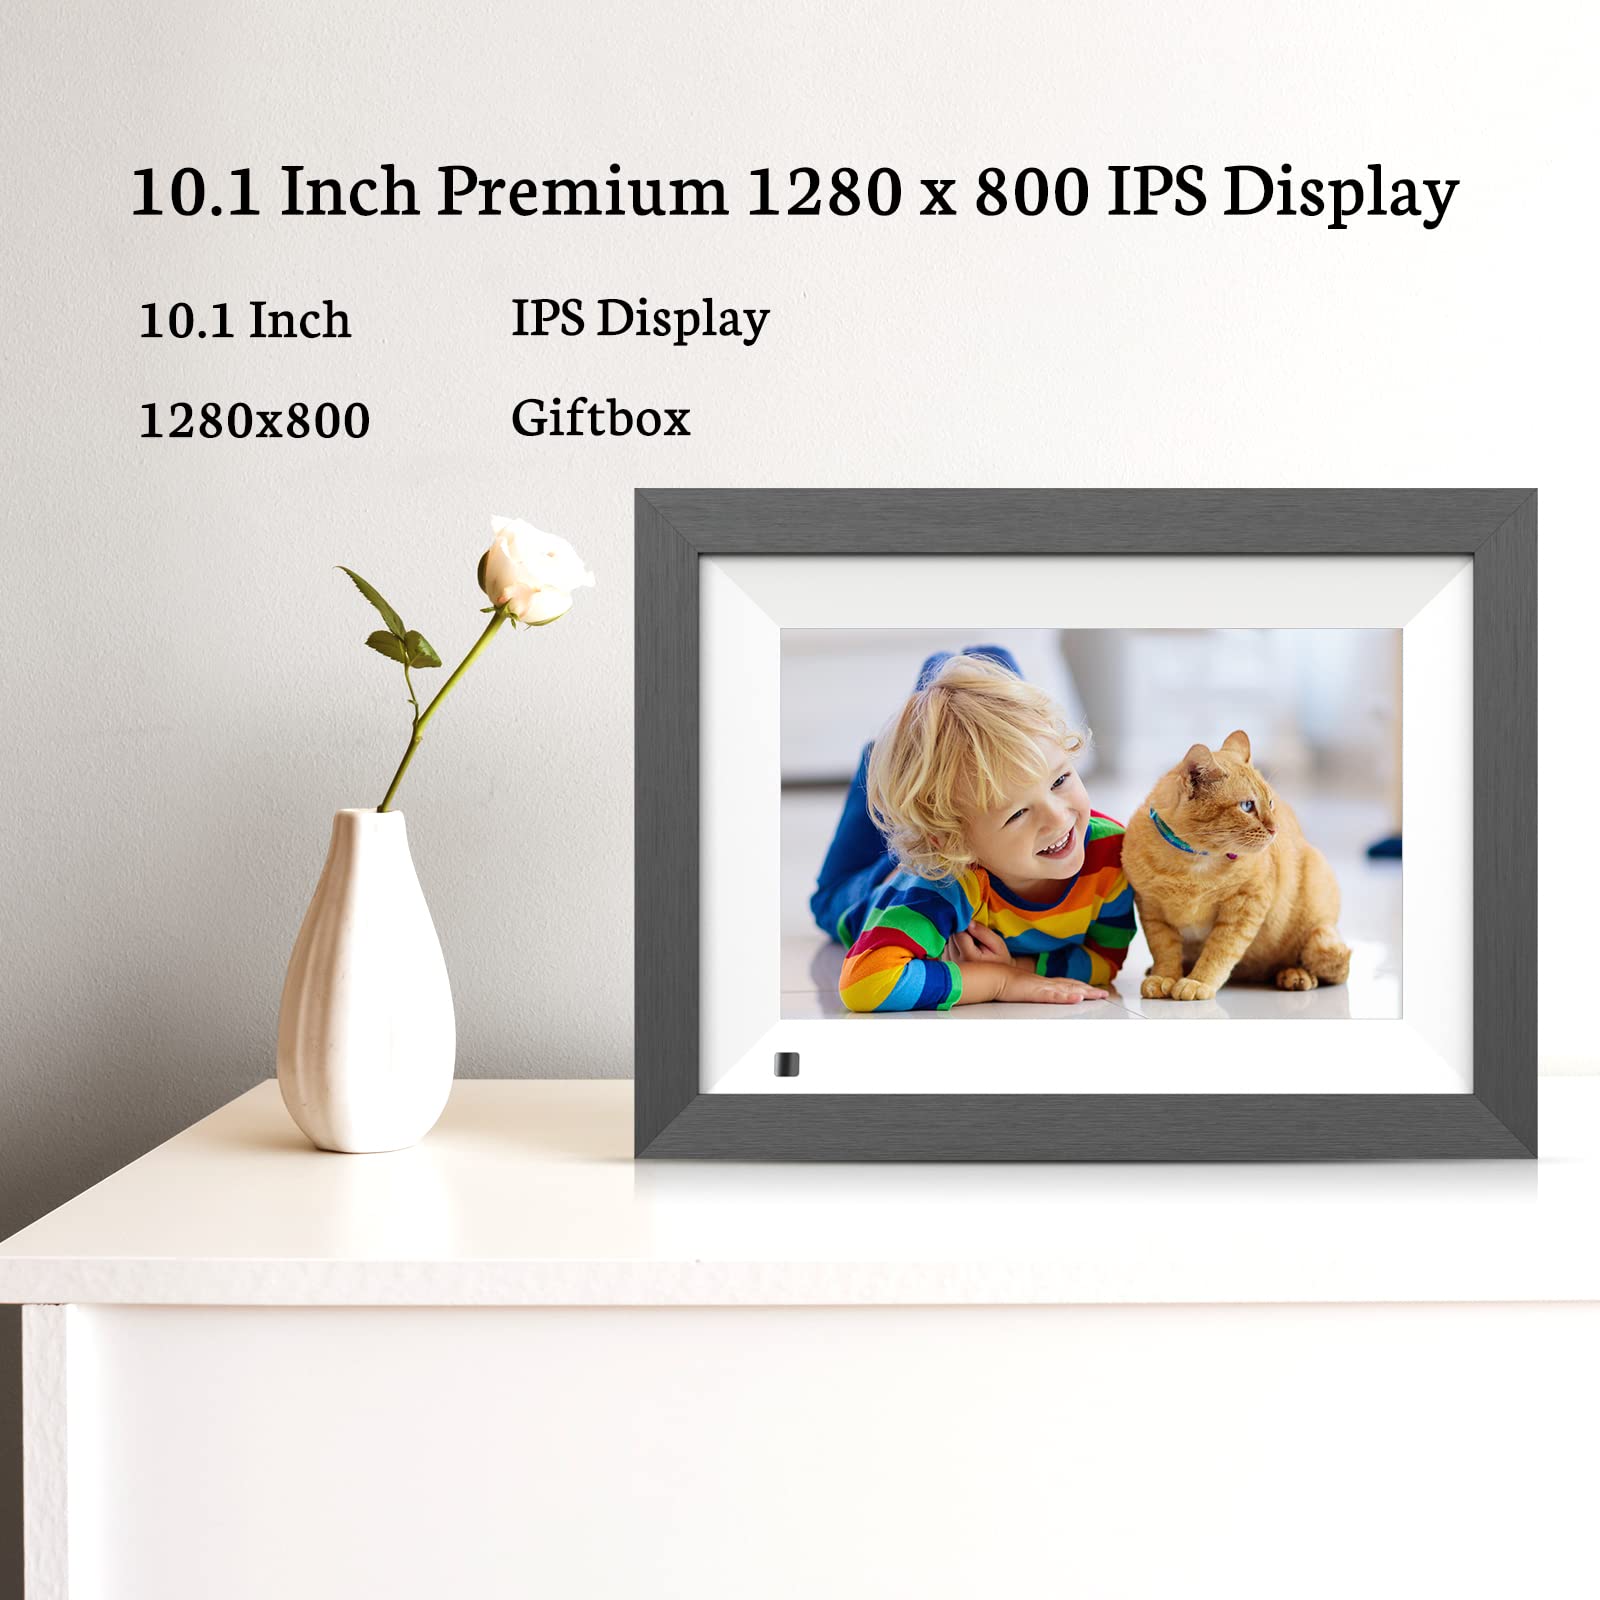 BSIMB WiFi Digital Picture Frame with Wood Effect, 16GB Electronic Photo Frame 10.1 Inch HD IPS Touch Screen Display, Instantly Share Photos/Videos via App Email, Auto-Rotate, Gift for Grandparents